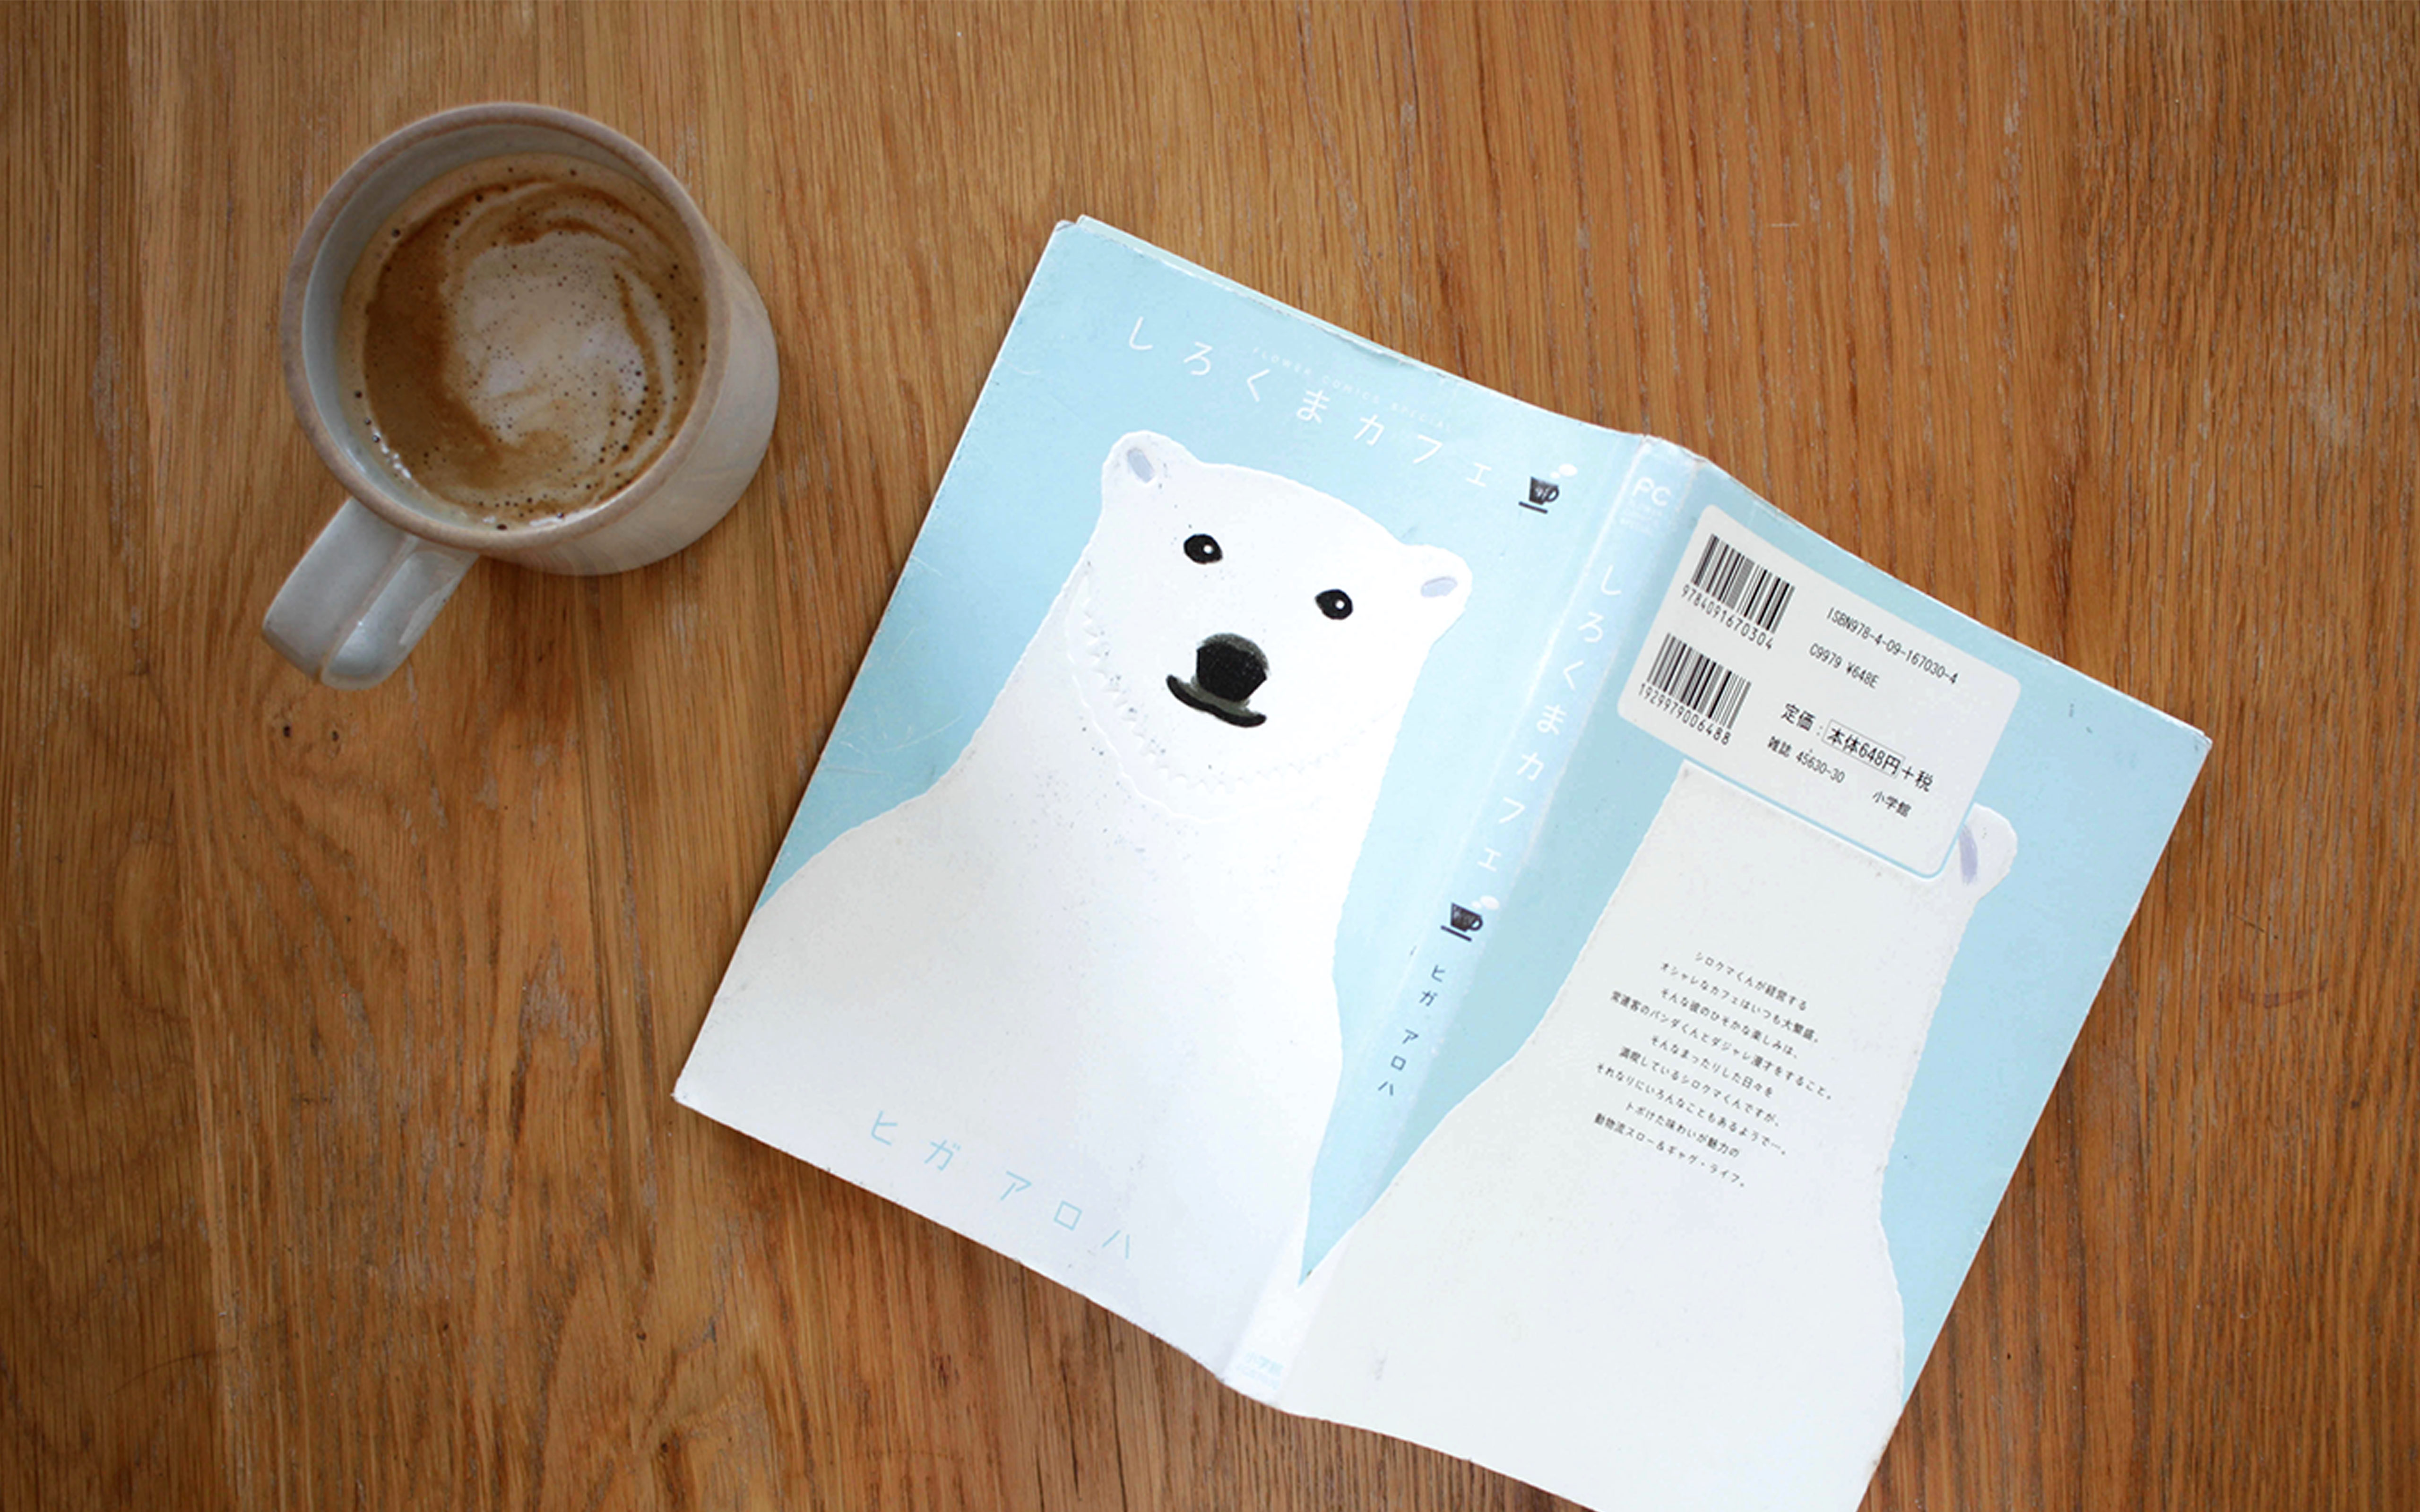 Polar Bear Cafe: Collector's Edition: Volume 2 from Polar Bear Cafe by  Aloha Higa published by Seven Seas @ ForbiddenPlanet.com - UK and Worldwide  Cult Entertainment Megastore